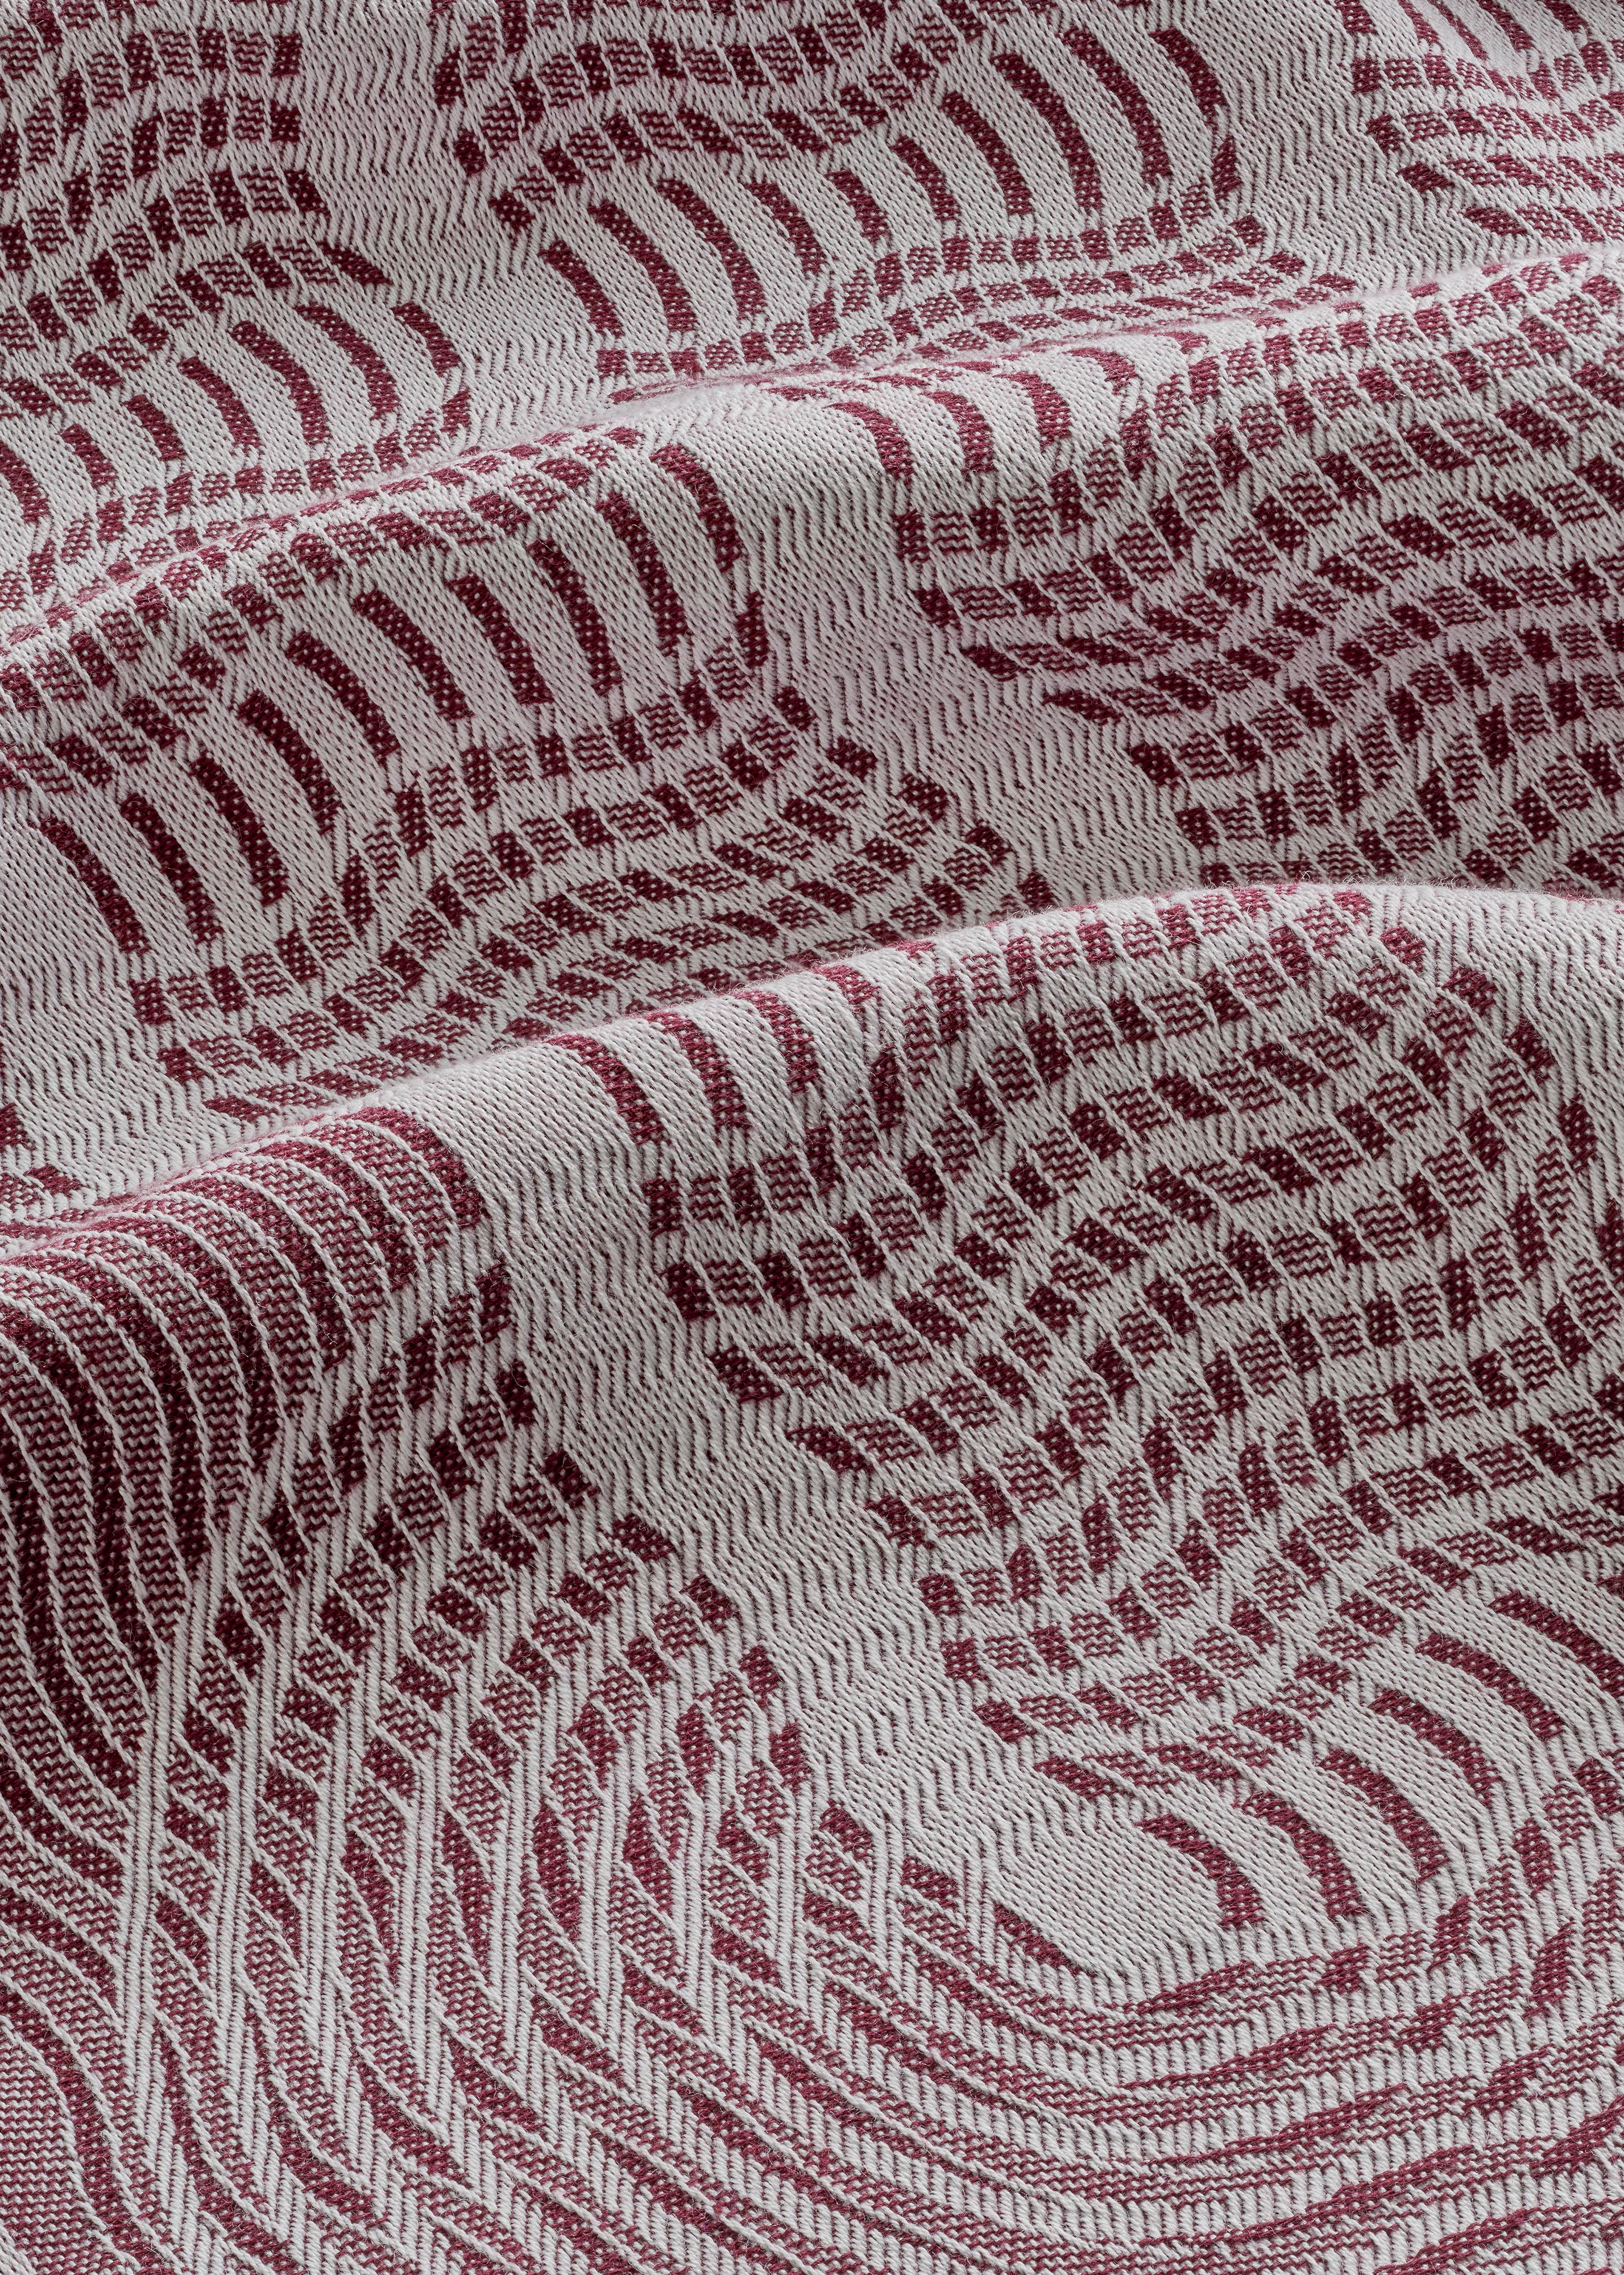 A collection of tea towels with dazzling lines and patterns.
Tangled-up comes in the following colors: Silver, gold, red, blue, and black.

Produced in the Textile lab of Textielmuseum, Tilburg.

Dimensions:
(L x W x H)
650 x 650 mm
7%